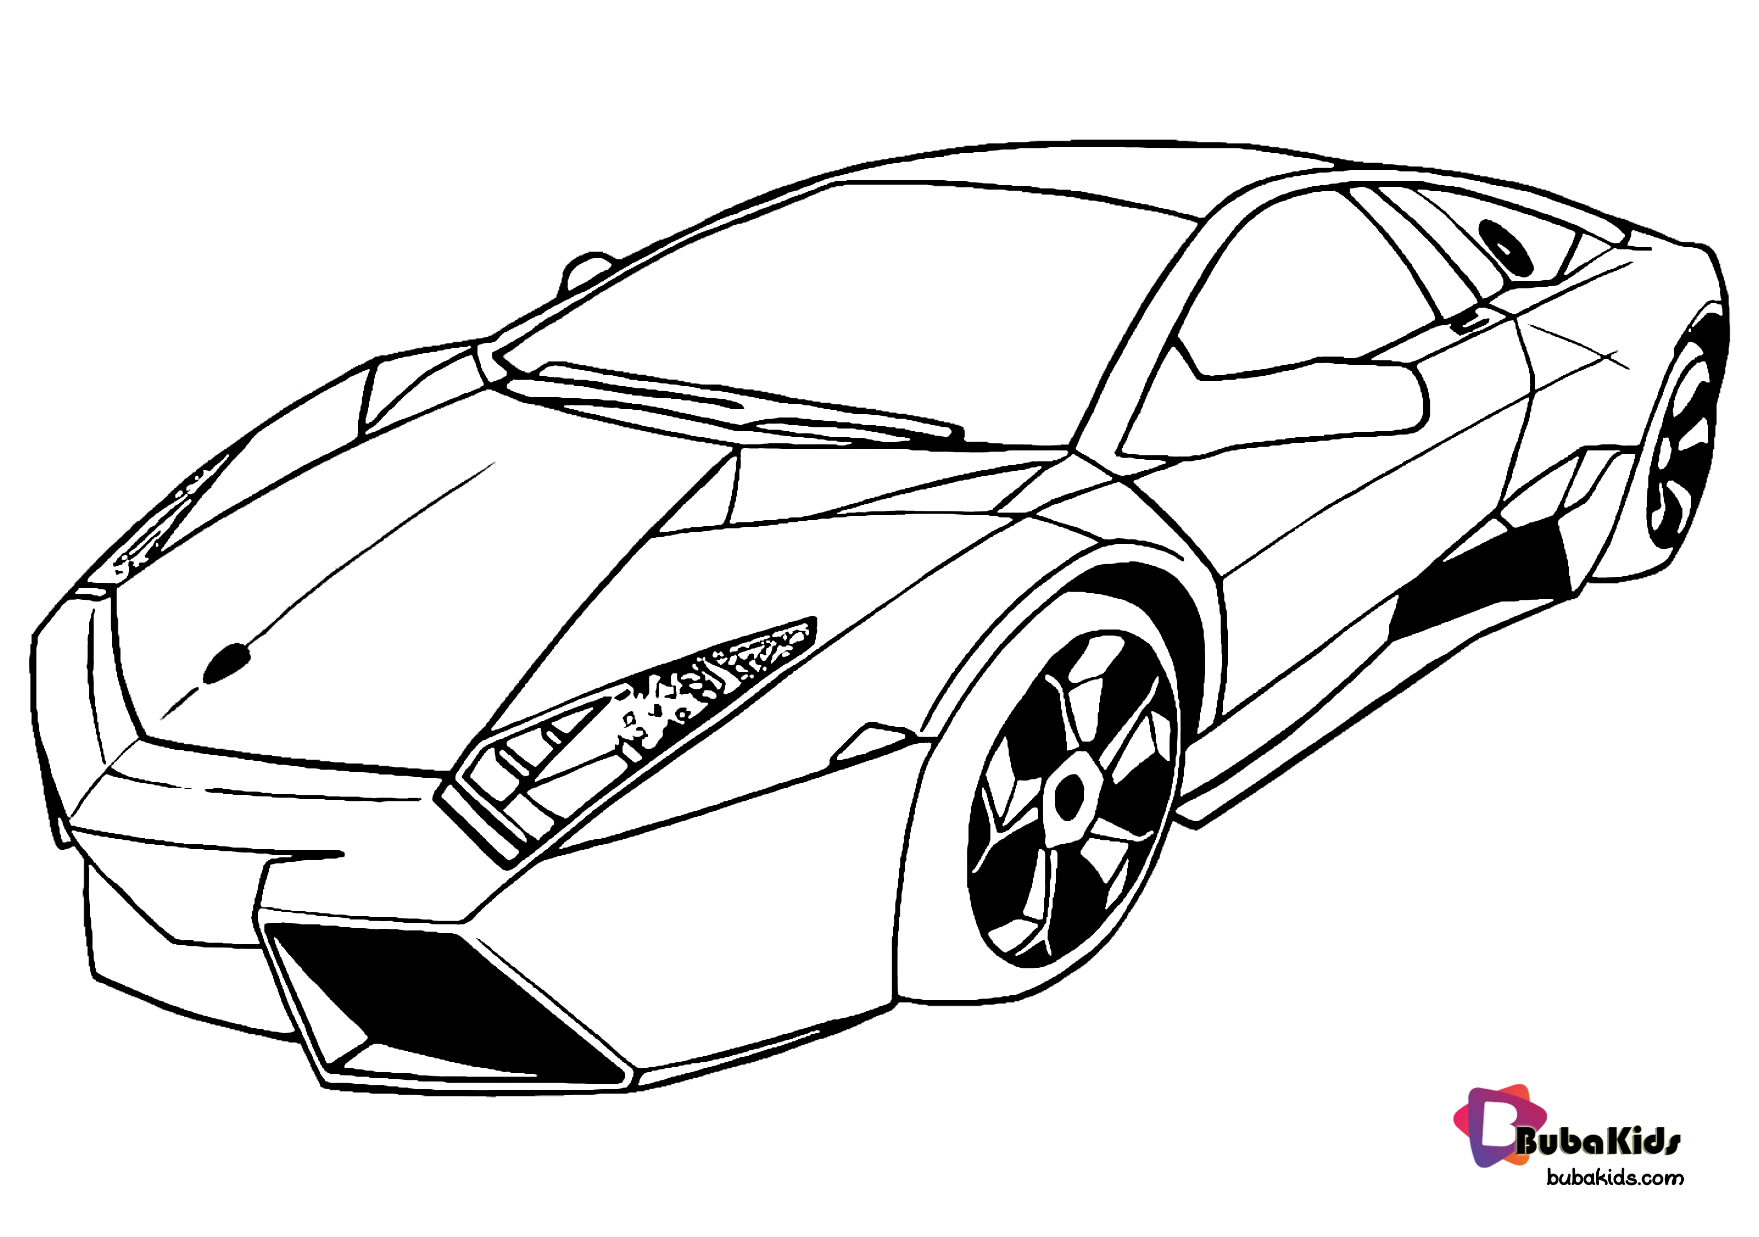 Free download and printable super car coloring page Collection of cartoon coloring  pages for | Cars coloring pages, Race car coloring pages, Super cars